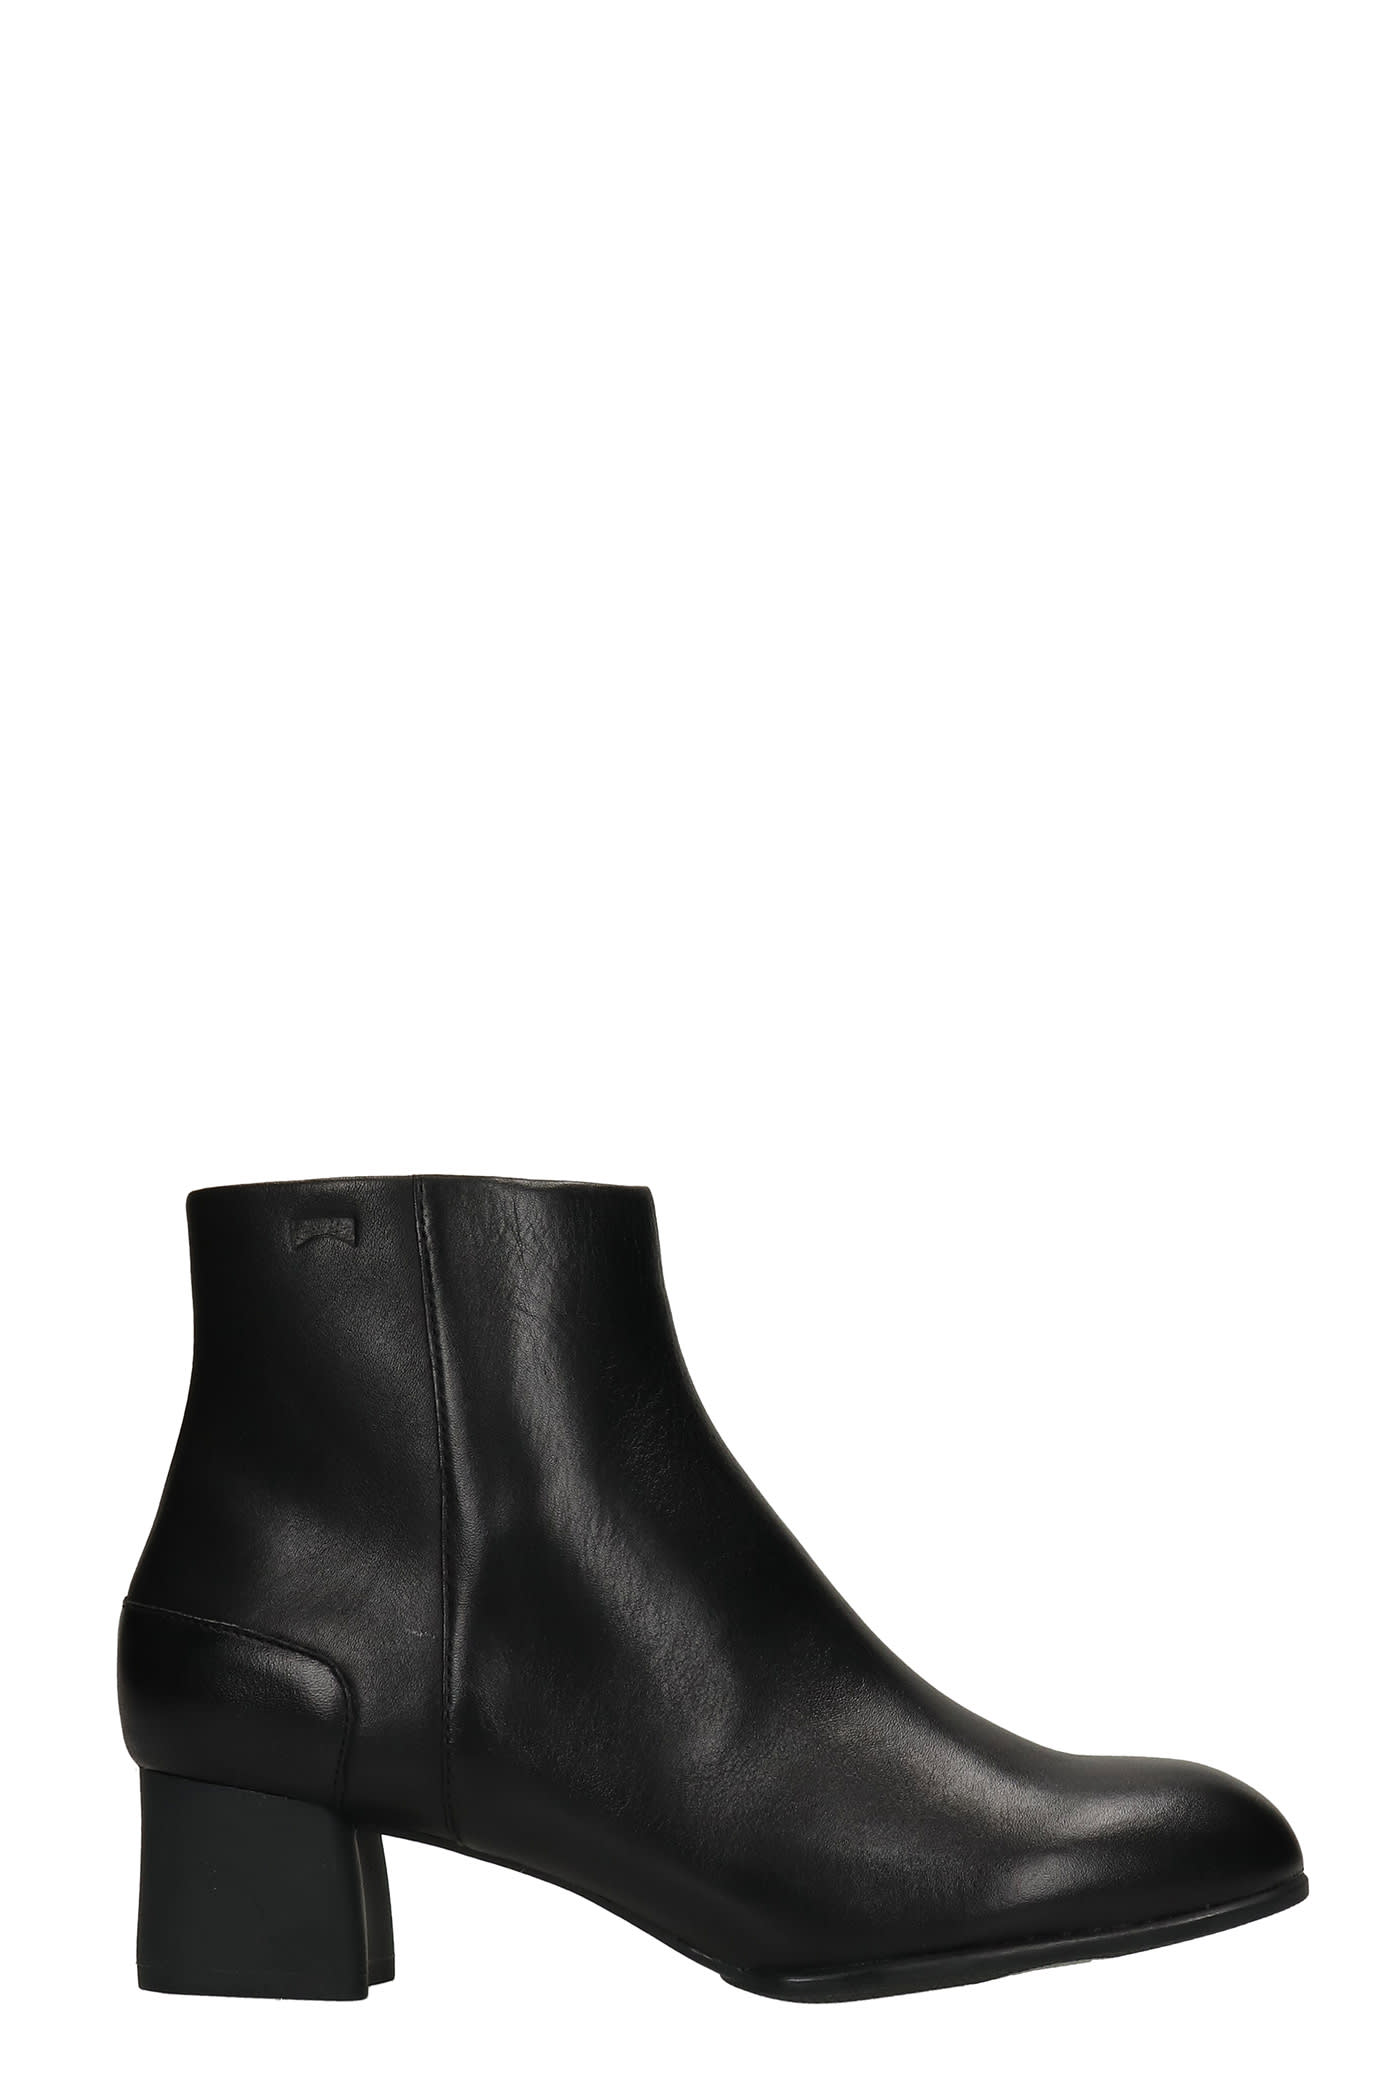 Camper Katie High Heels Ankle Boots In Black Leather